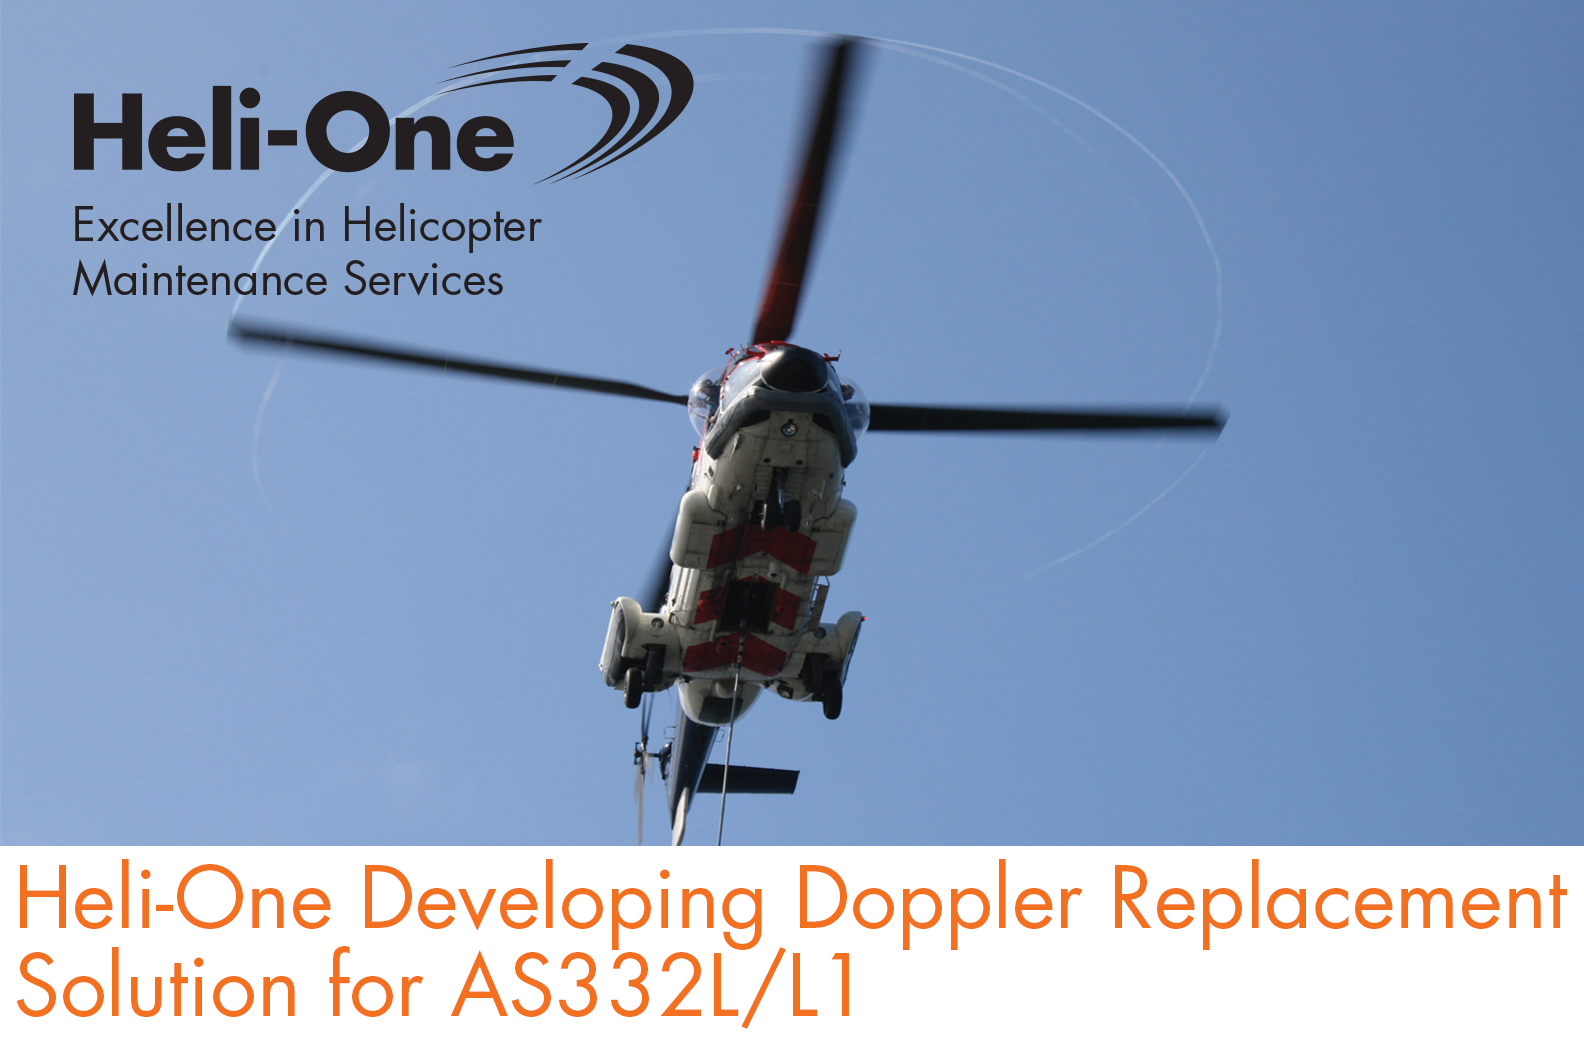 Oct-3-2017_Heli-One-Developing-Doppler-Replacement-Soln-for-AS332